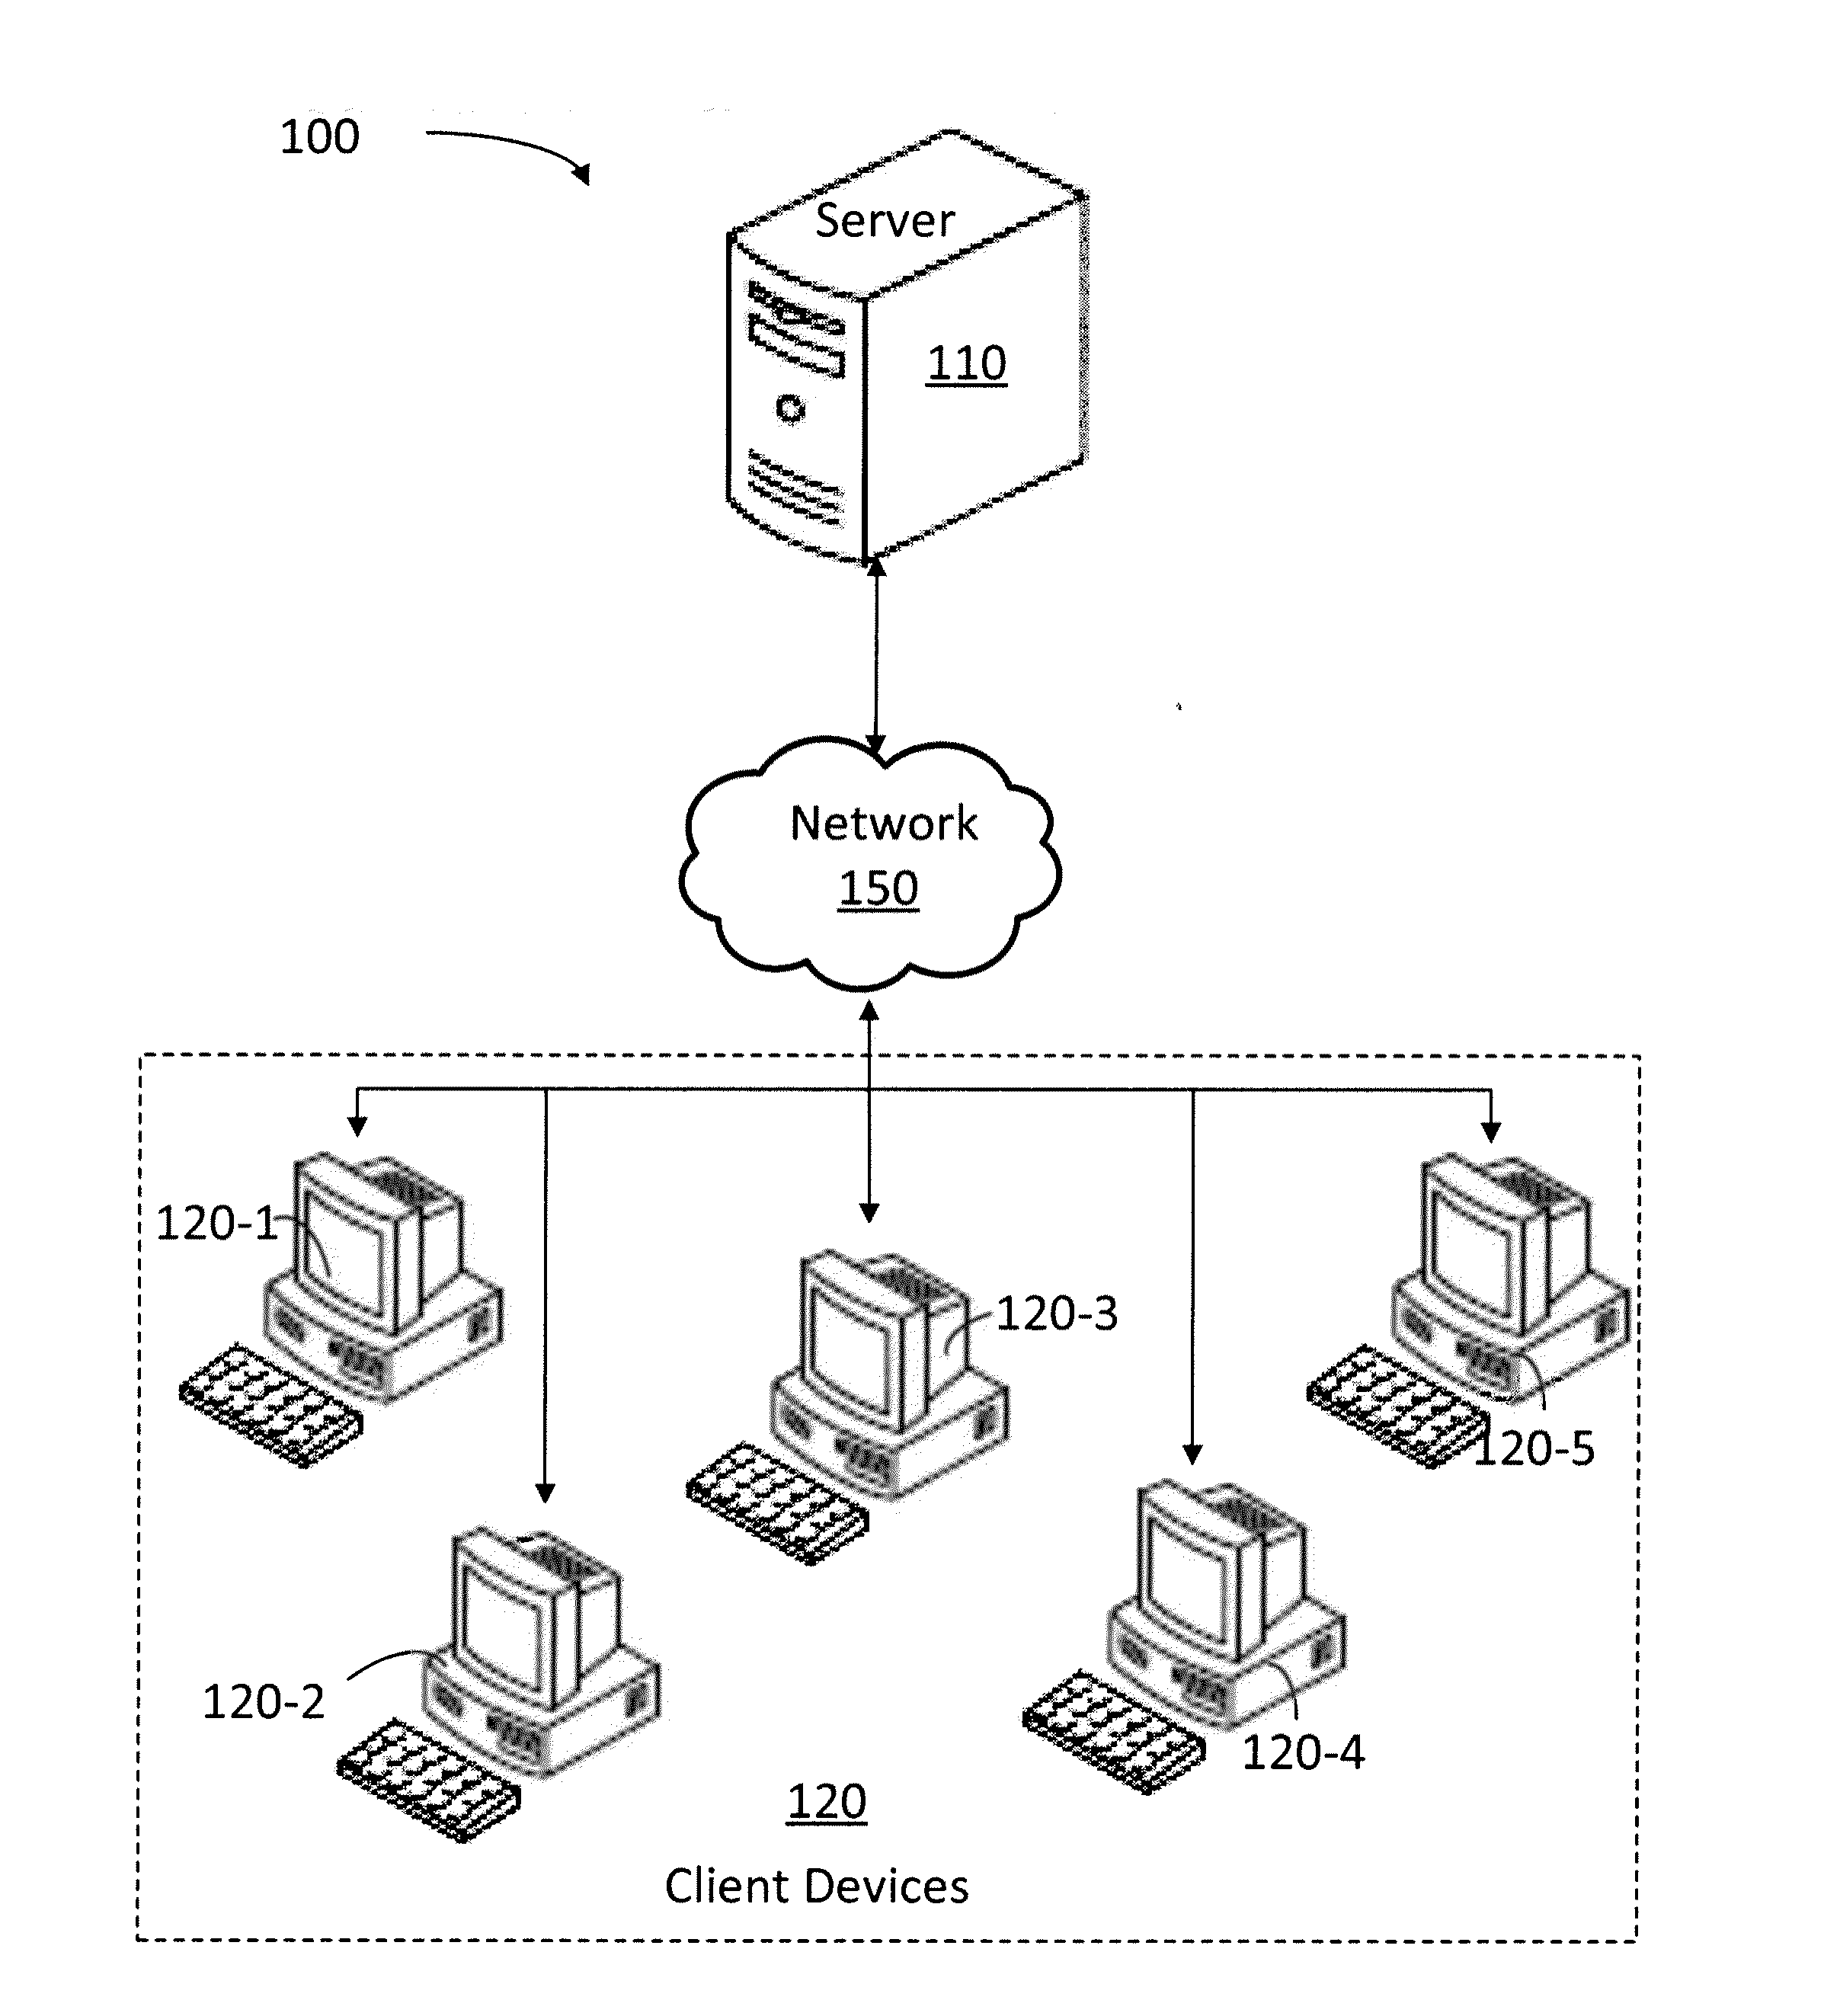 Method and system for determining hardware life expectancy and failure prevention